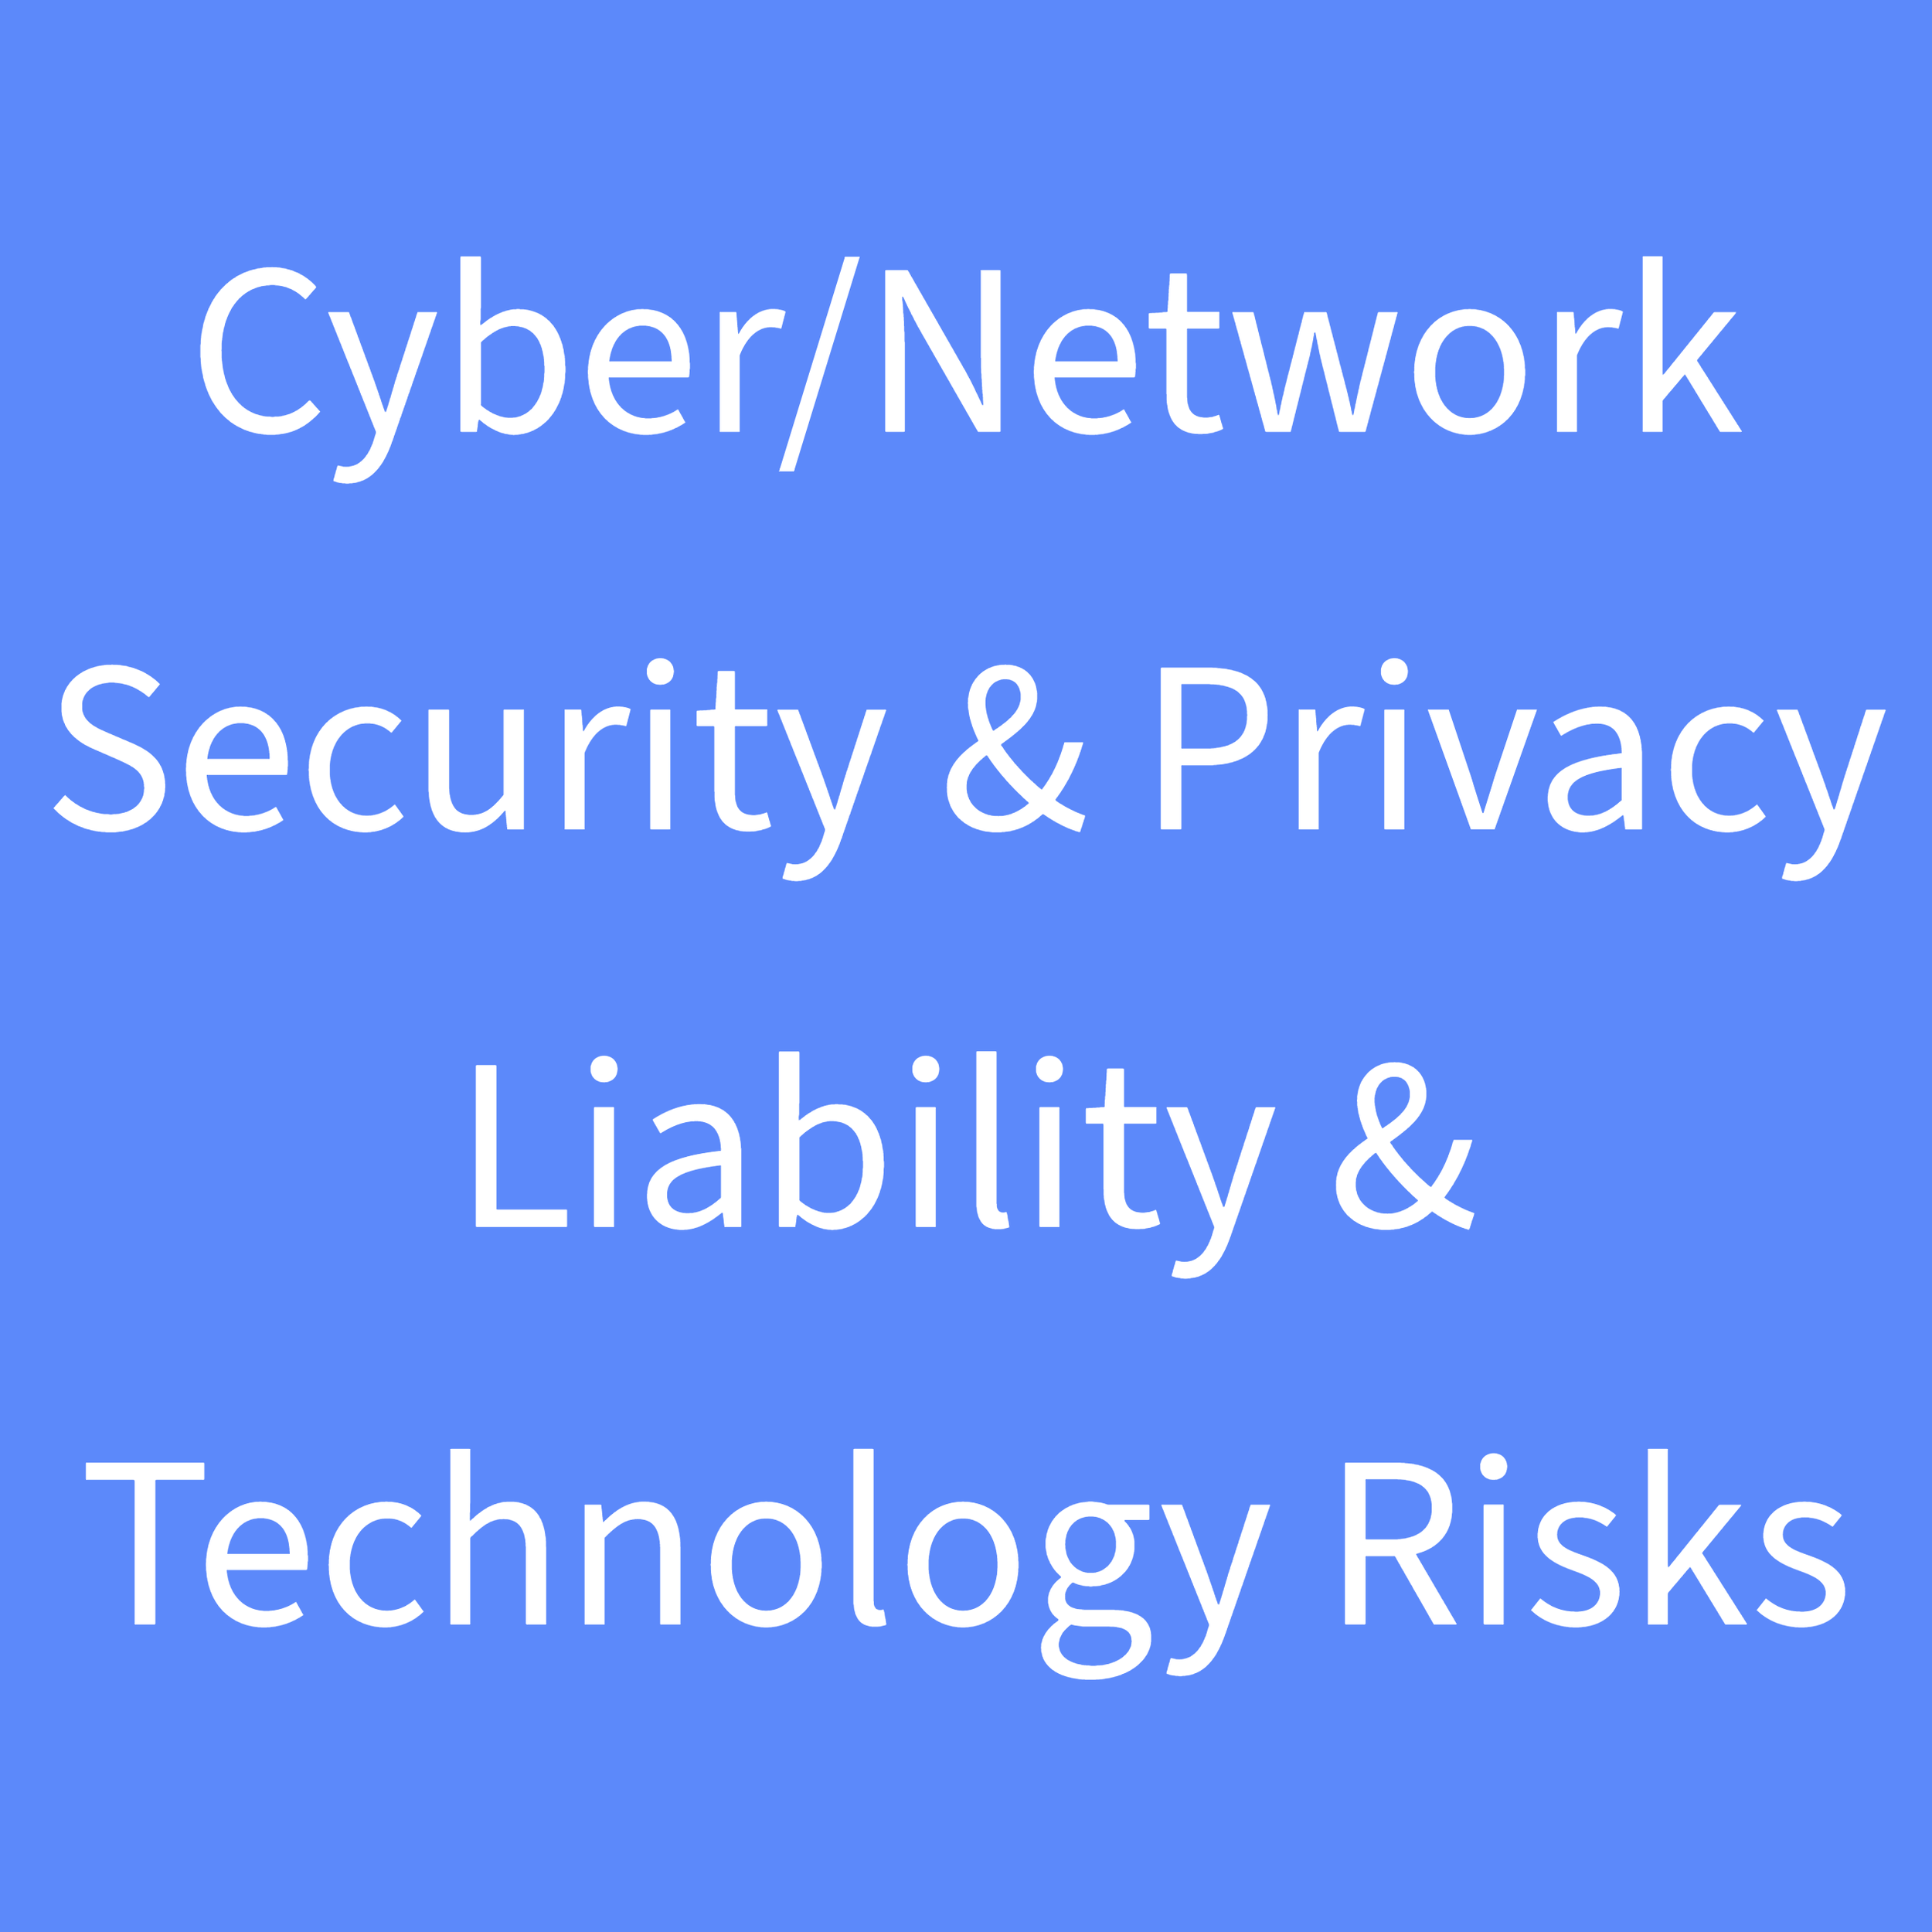 Cyber-Network Security & Privacy Liability & Technology Risks-1-Cyber_Network Security & Privacy Liability & Tech.png